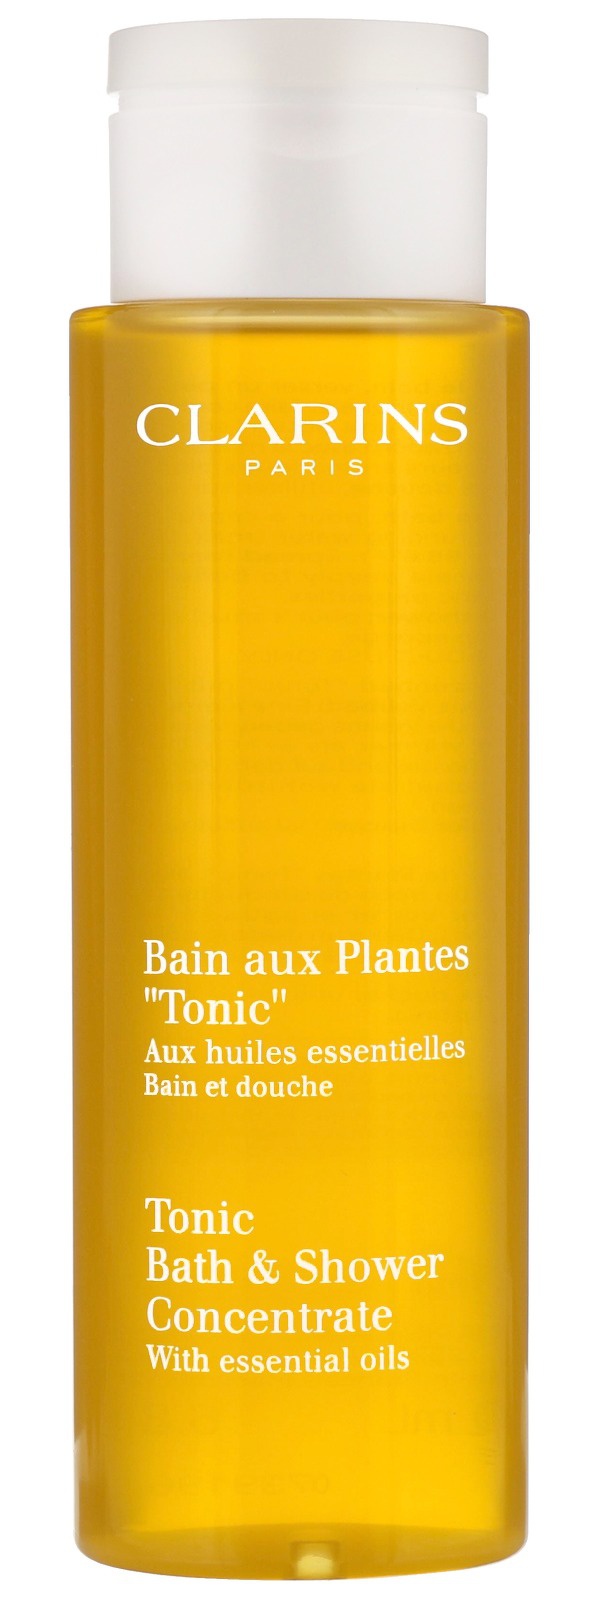 Clarins Tonic Bath And Shower Concentrate